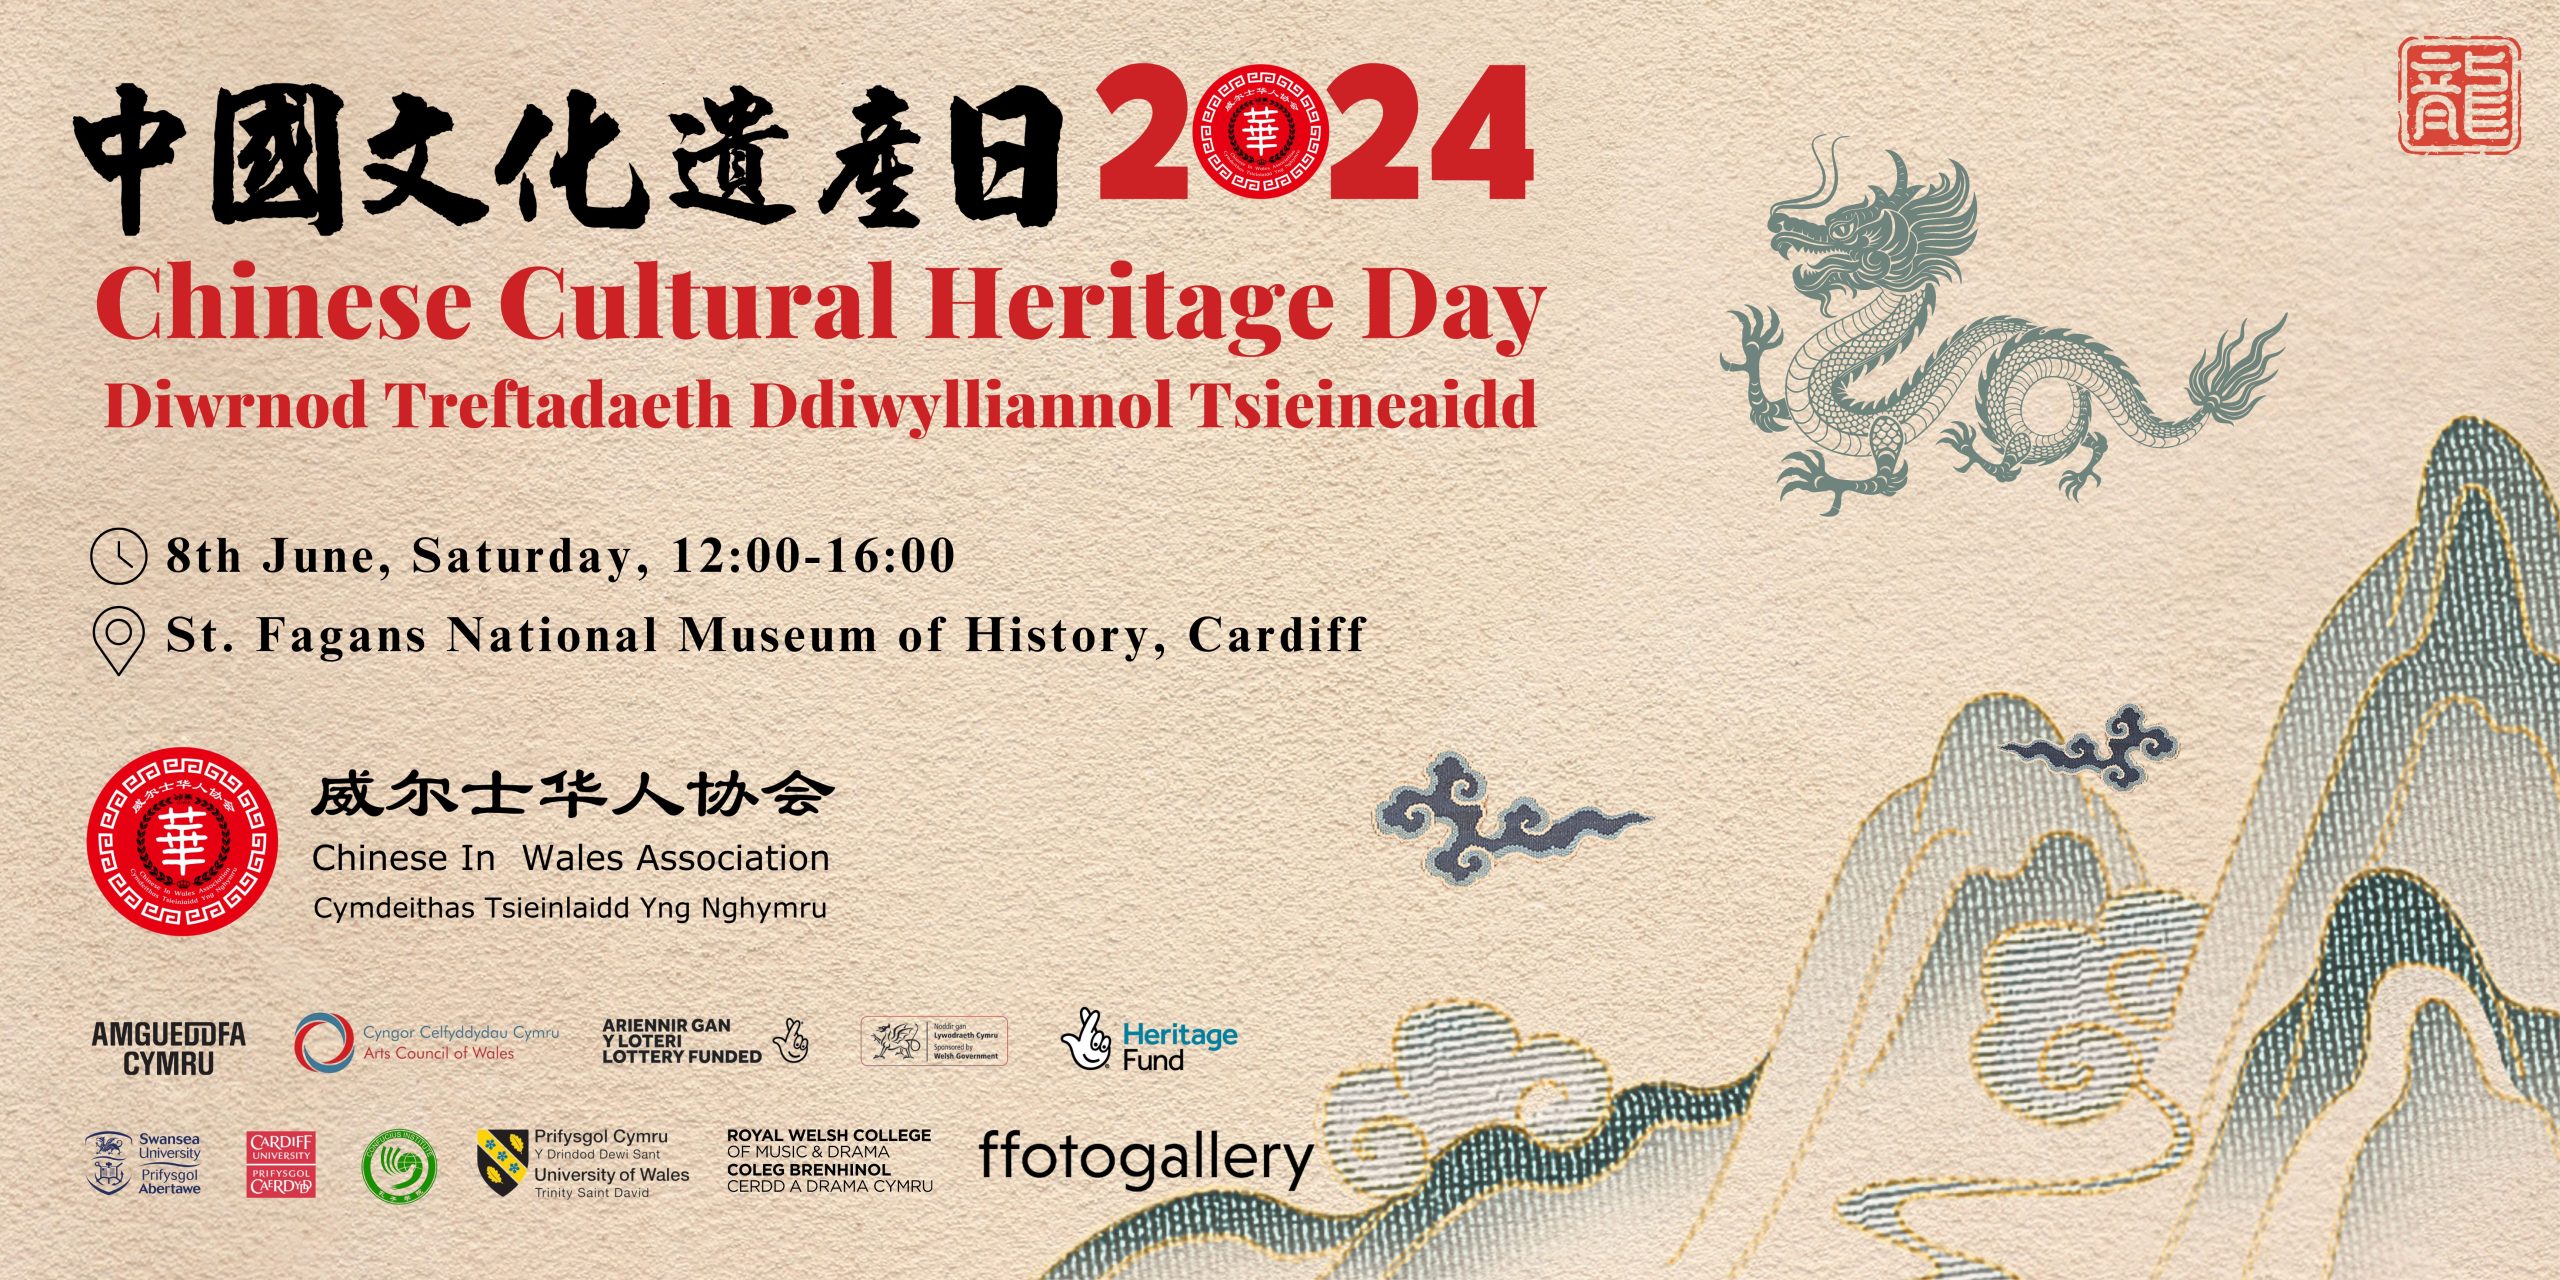 Chinese Cultural Heritage Day 2024